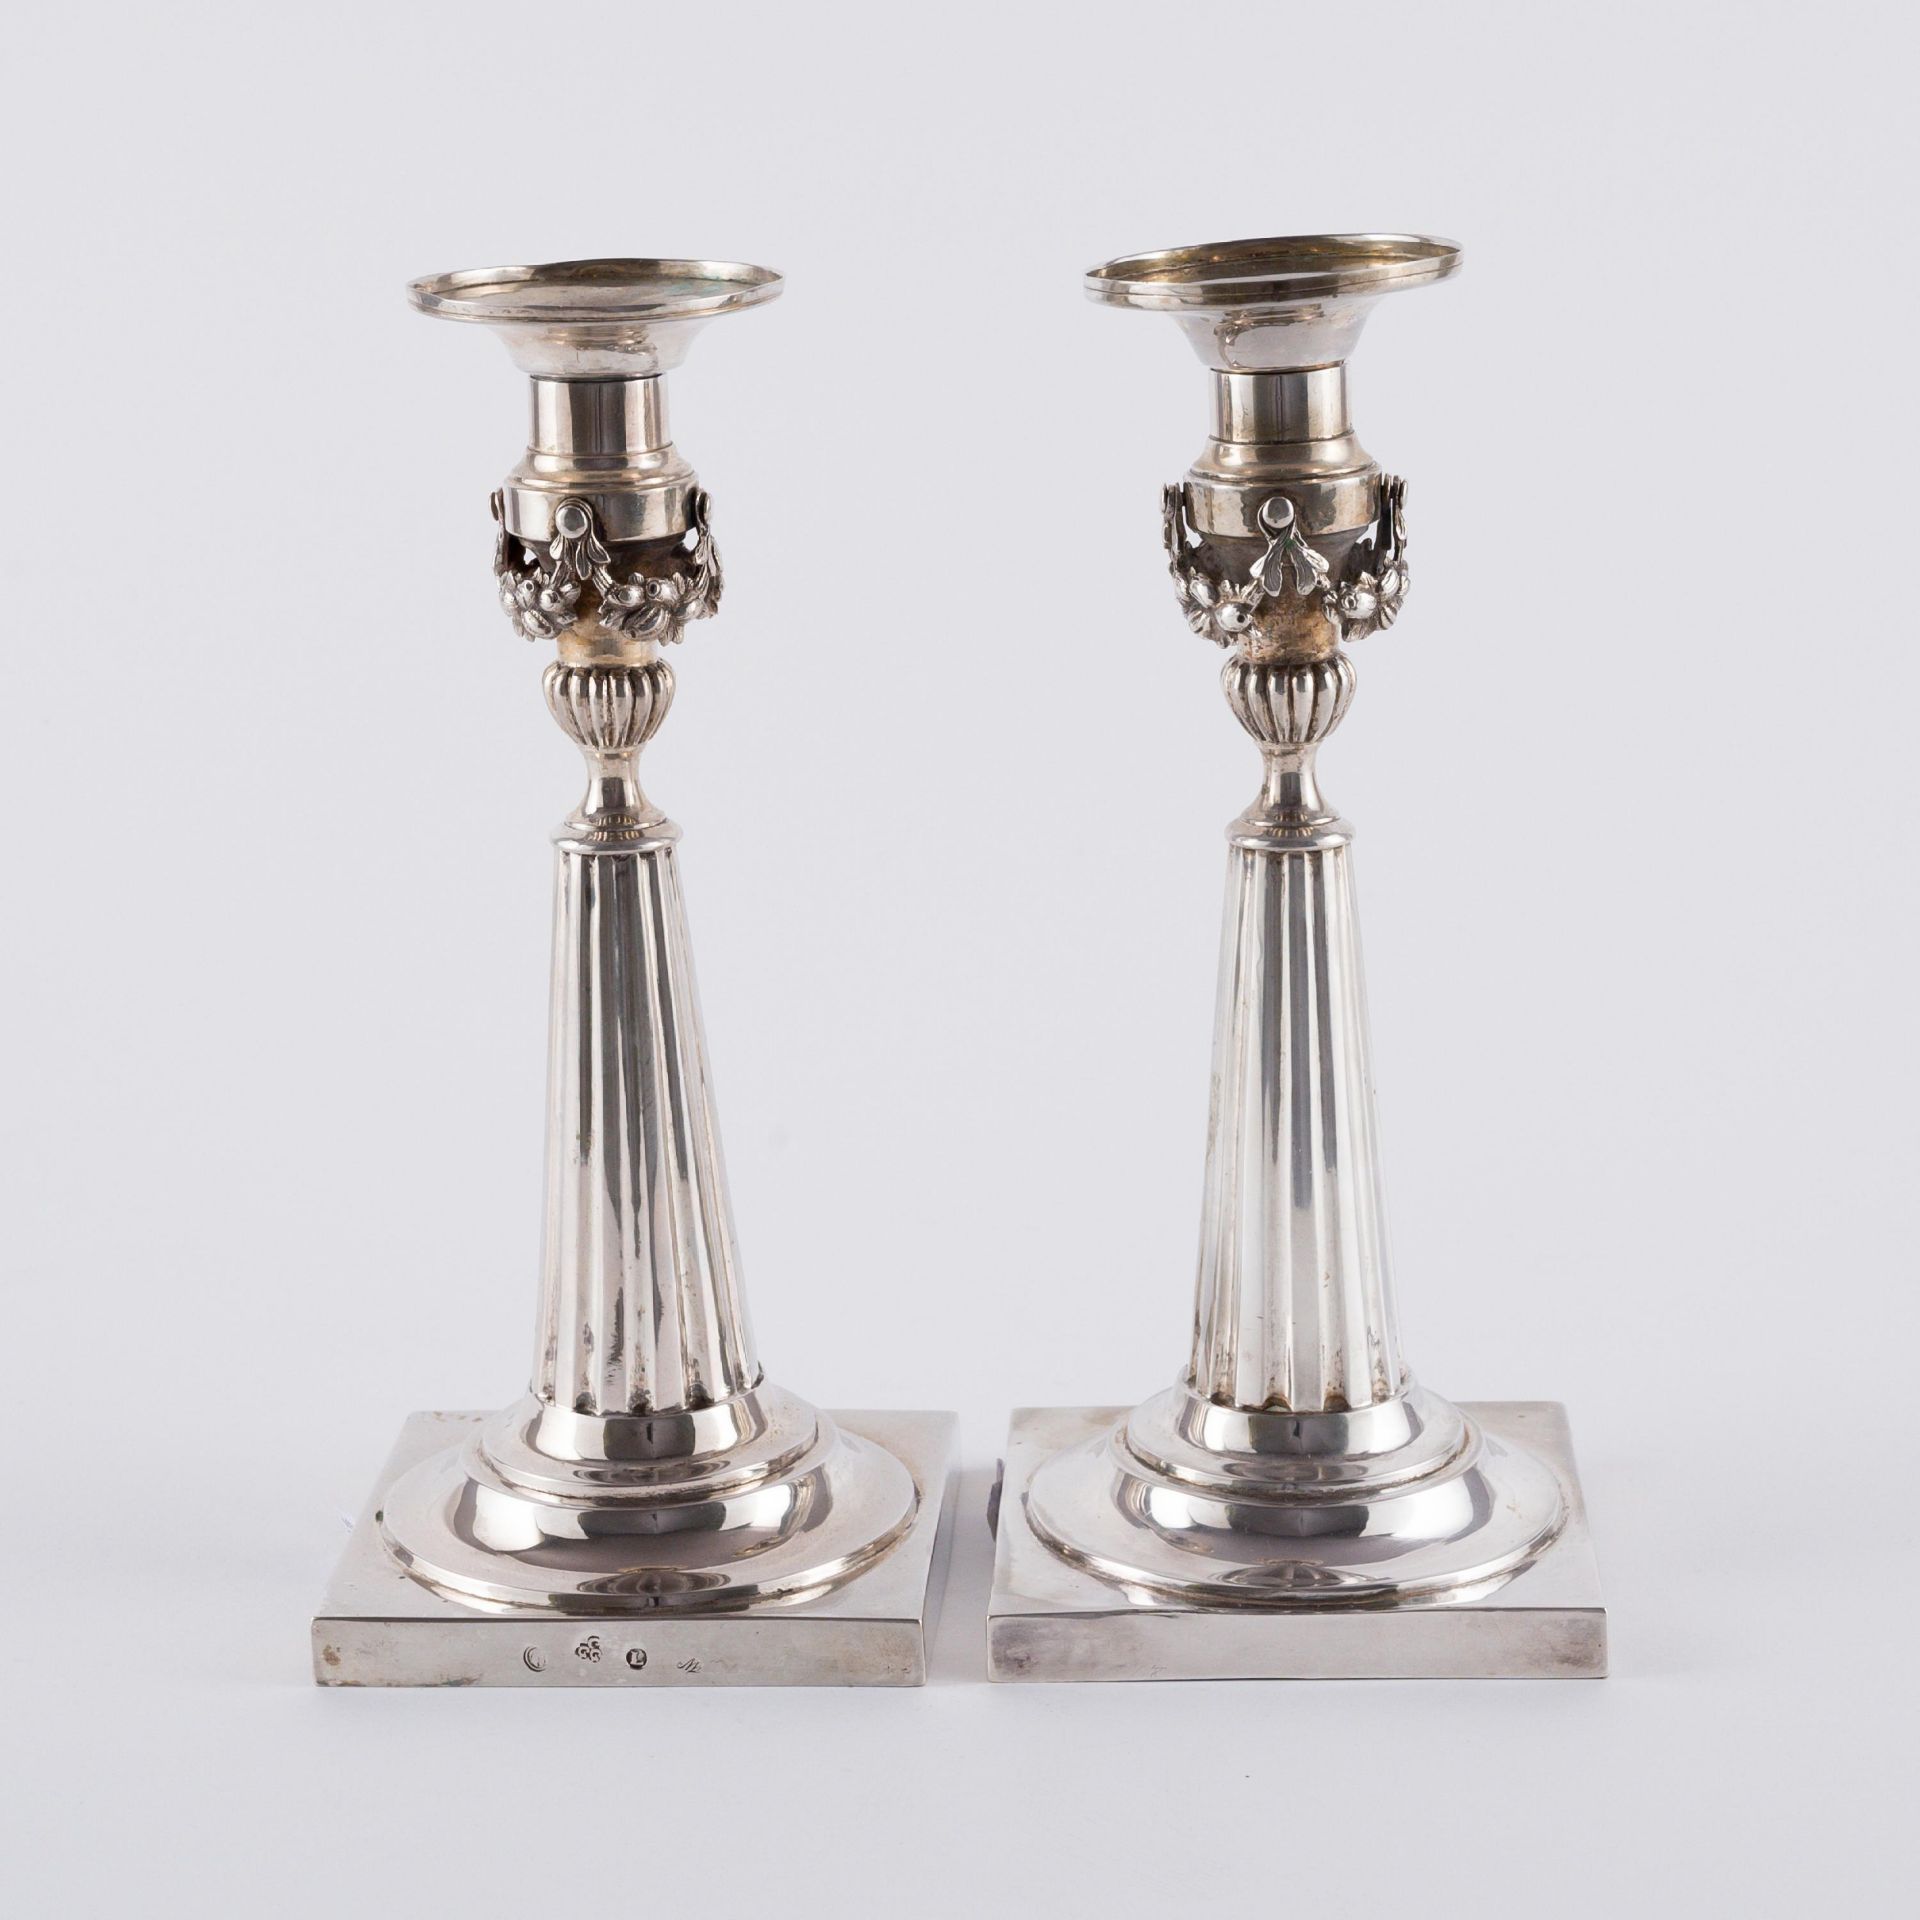 Carl Gottlieb Gröger: PAIR OF SILVER CANDLESTICKS WITH FLUTED SHAFT AND FESTOONS - Image 4 of 6